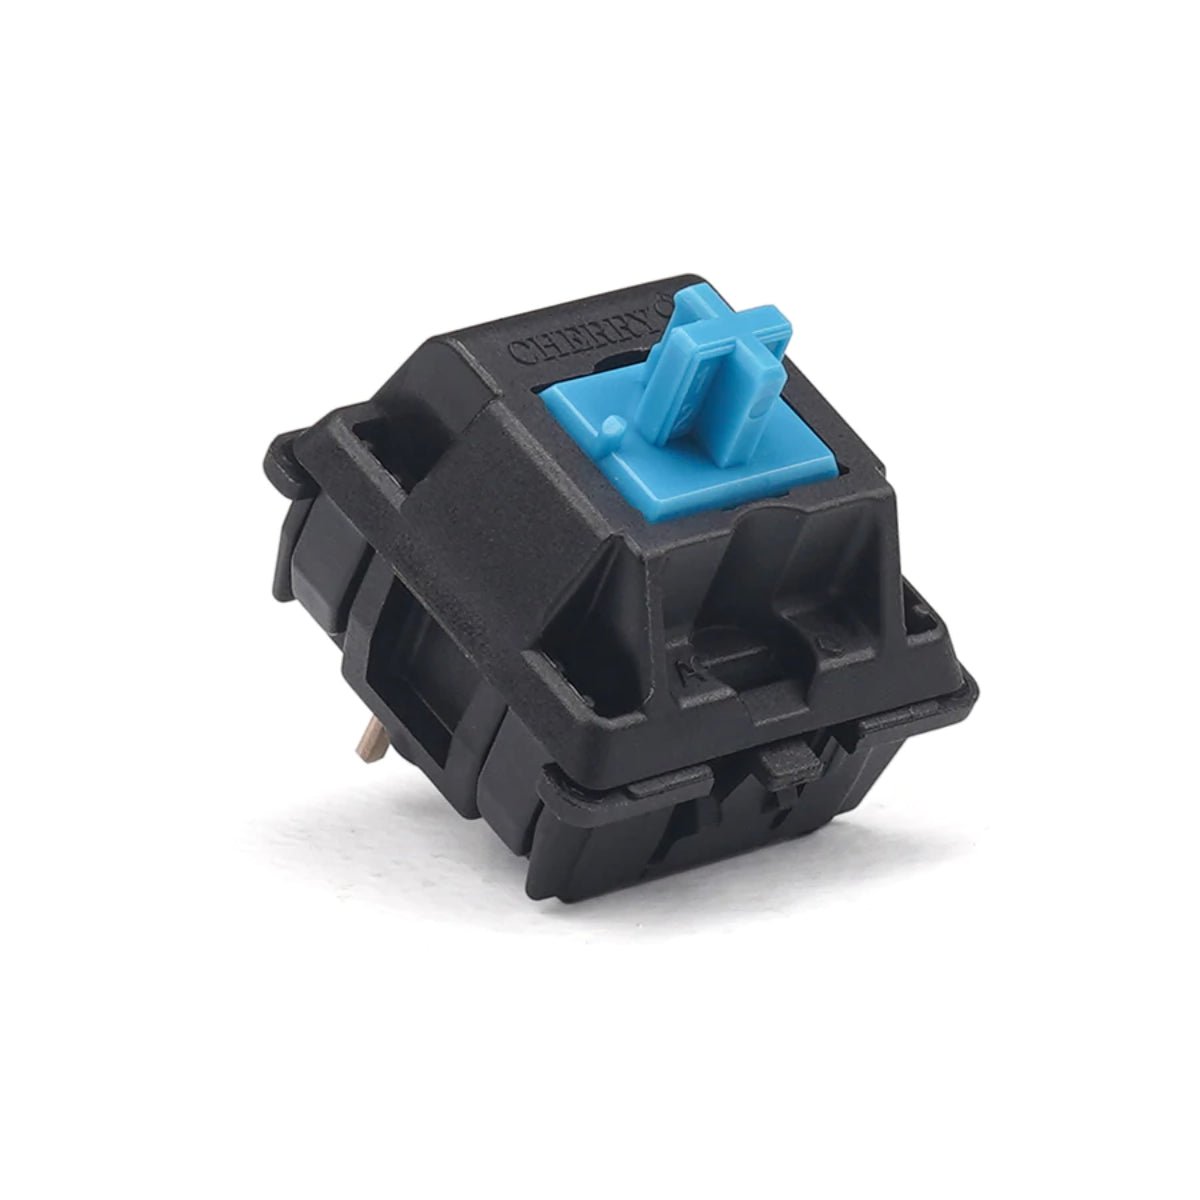 KBD Fans Cherry MX Hyperglide Switches - Blue - Store 974 | ستور ٩٧٤